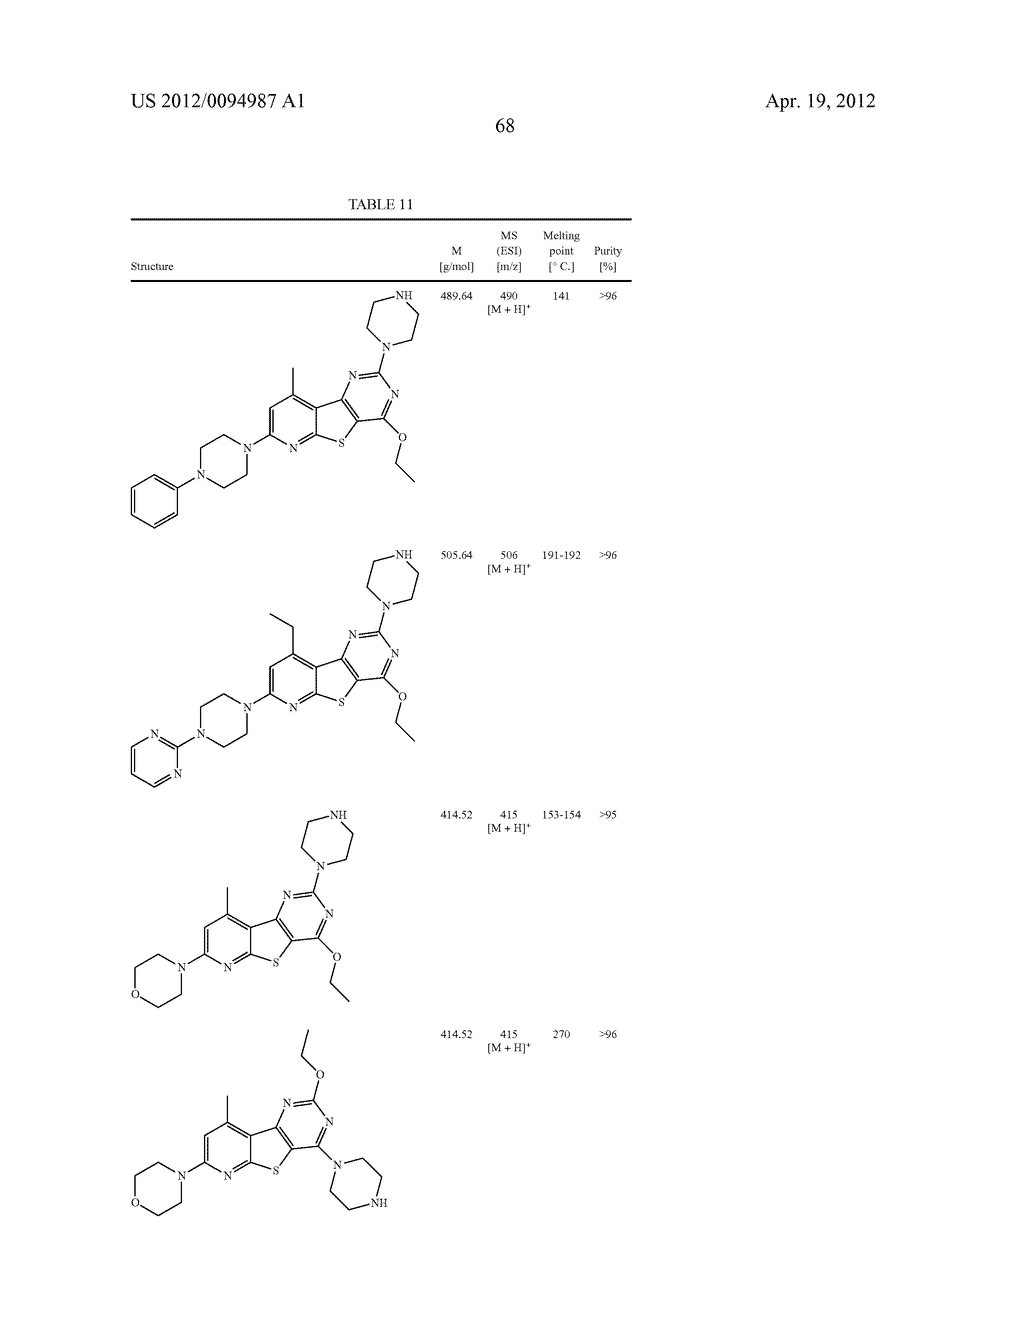 SUBSTITUTED PYRIDO [3', 2': 4, 5] THIENO [3, 2-D] PYRIMIDINES AND PYRIDO     [3', 2': 4, 5] FURO [3, 2-D] PYRIMIDINES USED AS INHIBITORS OF THE PDE-4     AND/OR THE RELEASE OF TNF-alpha - diagram, schematic, and image 70